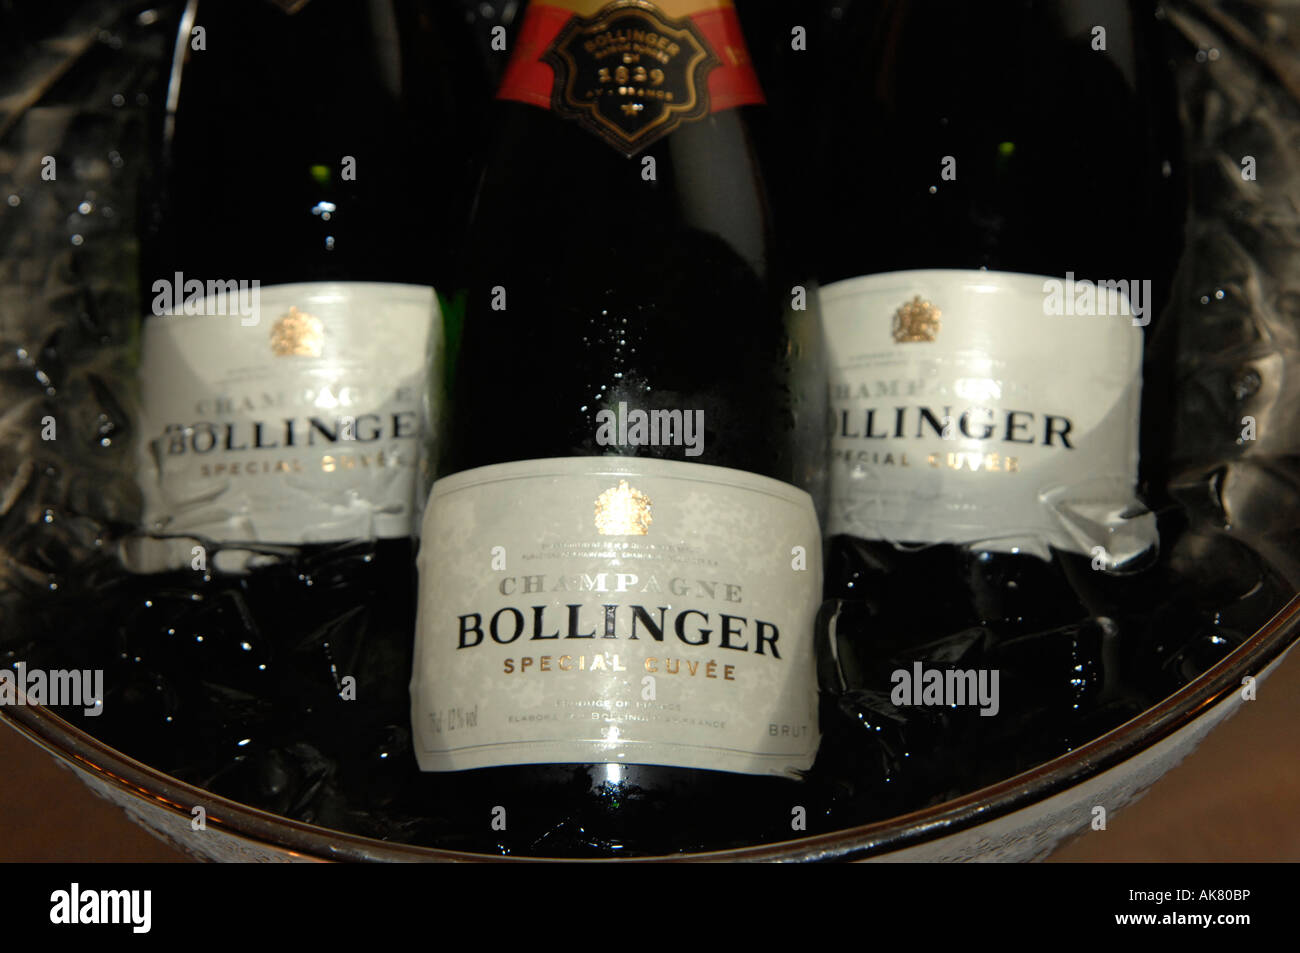 Bollinger Champagne being chilled in ice bucket Stock Photo